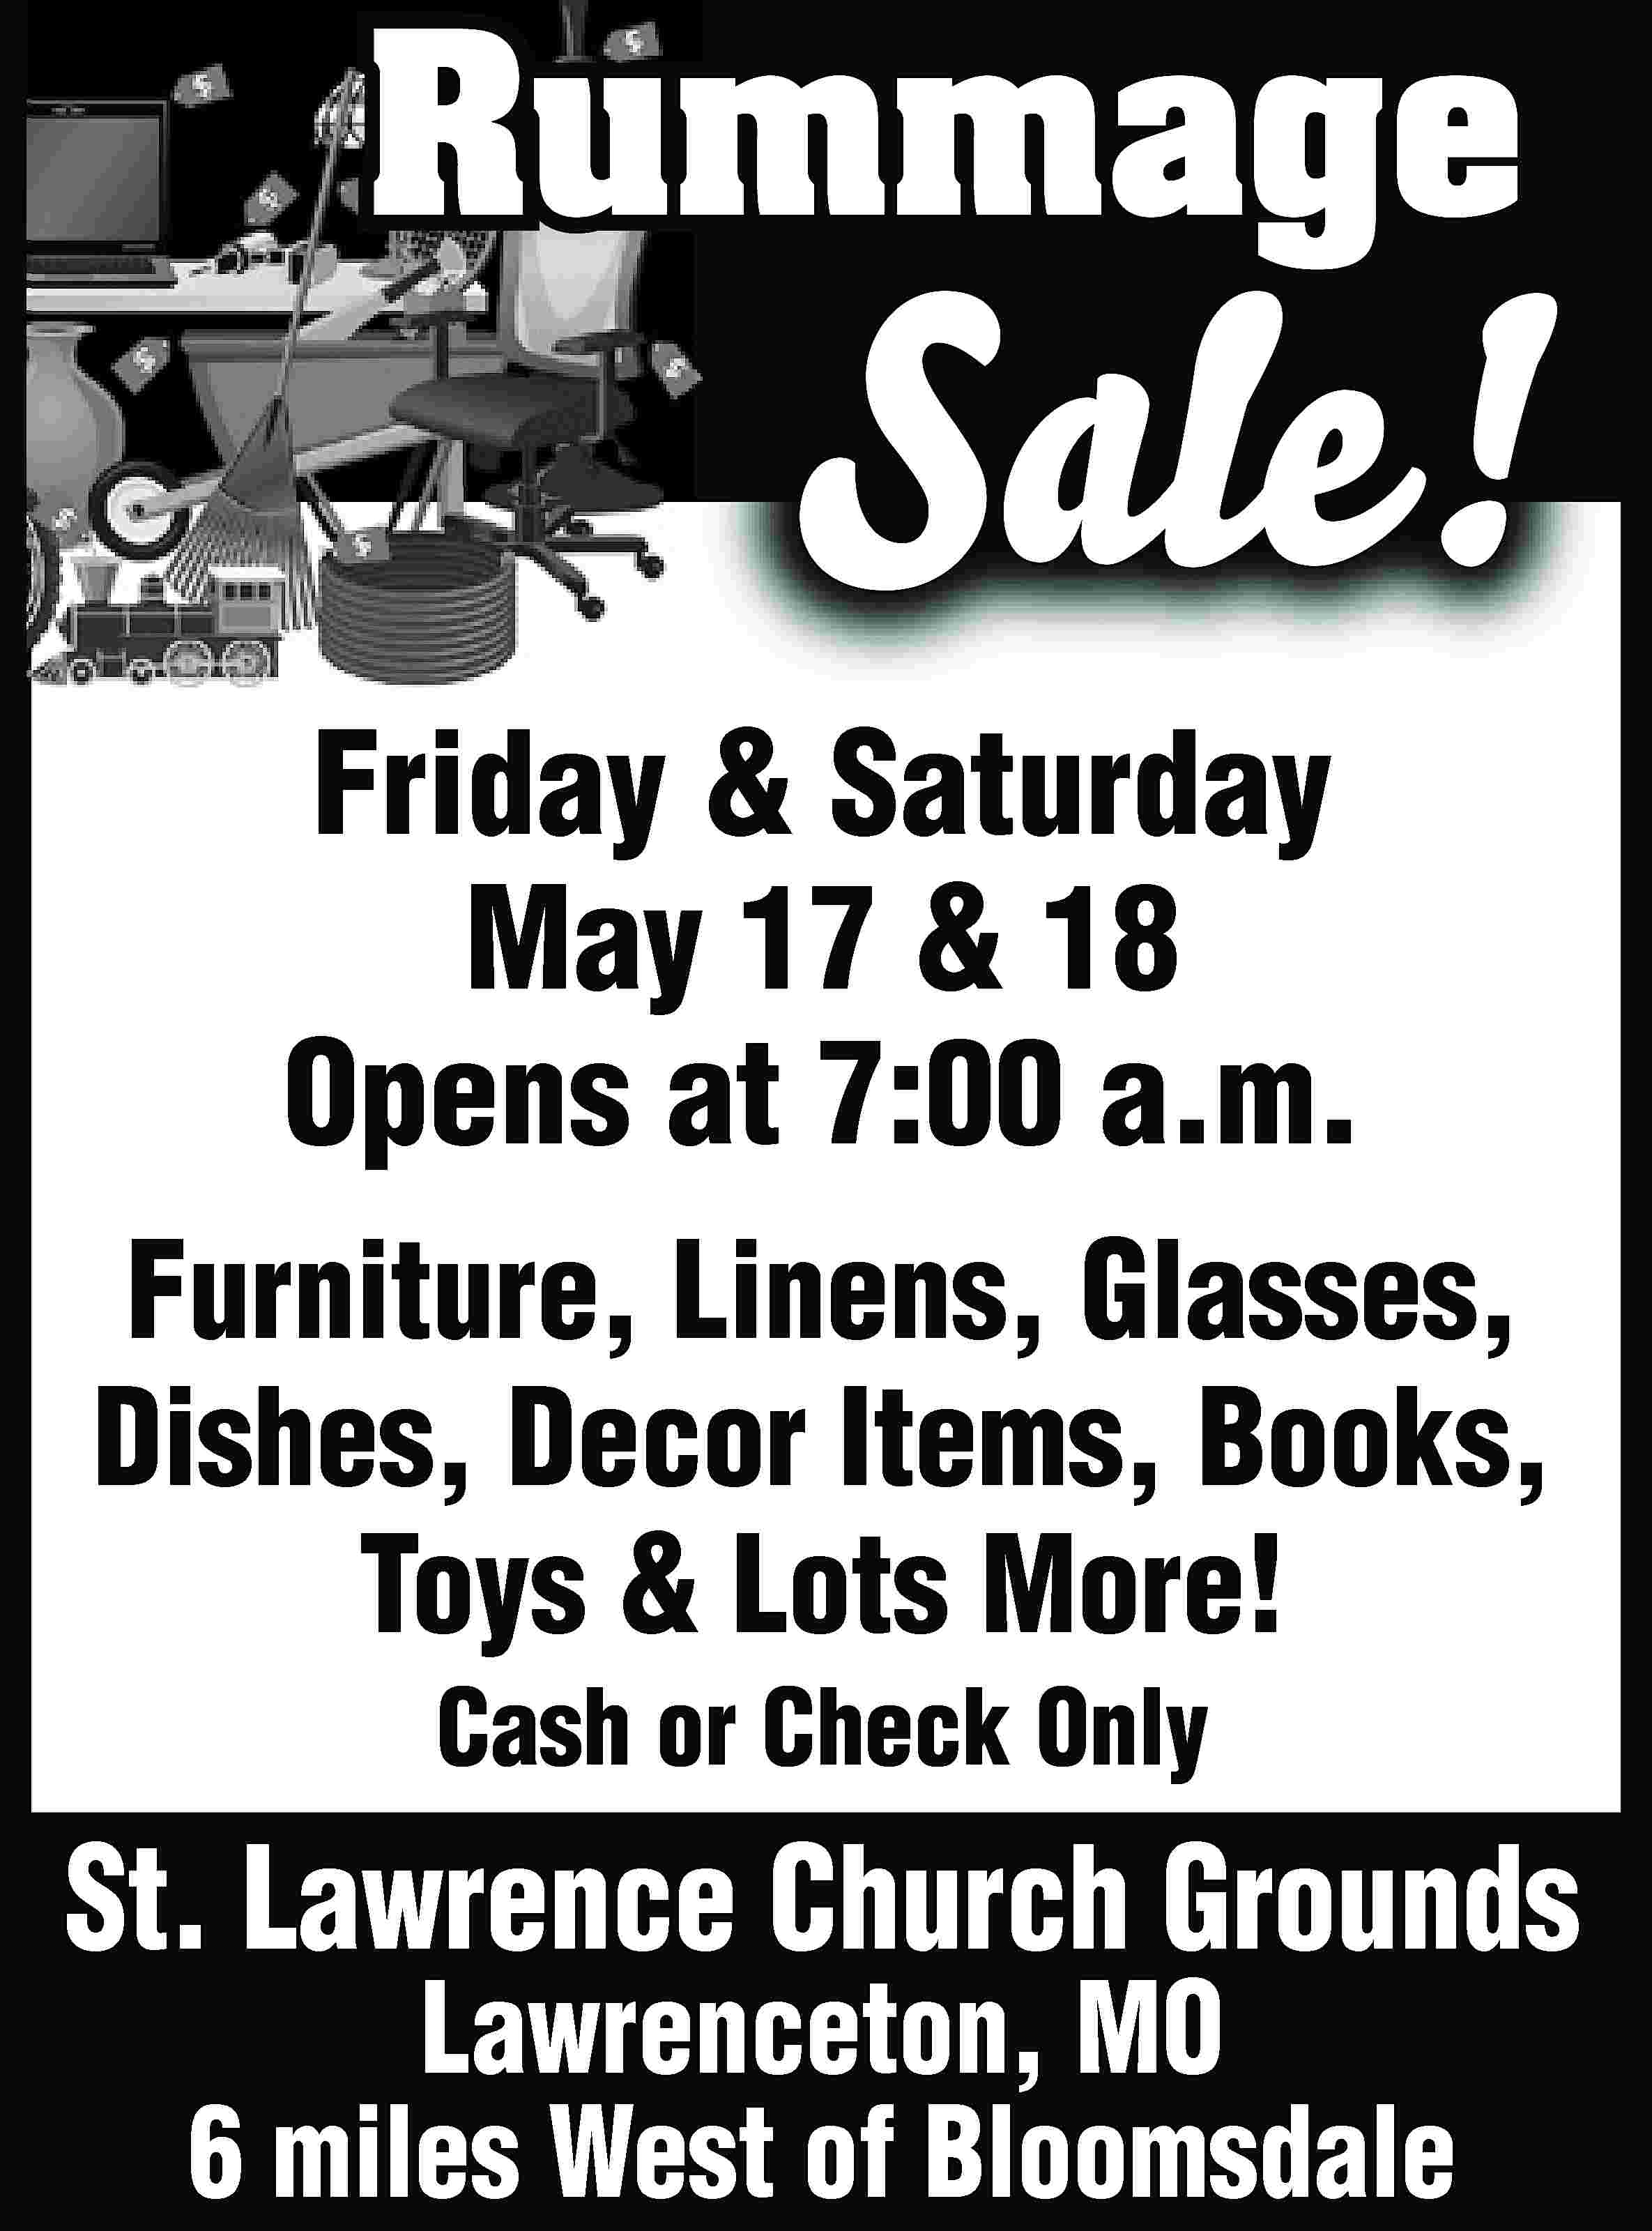 Rummage Sale! Friday & Saturday  Rummage Sale! Friday & Saturday May 17 & 18 Opens at 7:00 a.m. Furniture, Linens, Glasses, Dishes, Decor Items, Books, Toys & Lots More! Cash or Check Only St. Lawrence Church Grounds Lawrenceton, MO 6 miles West of Bloomsdale